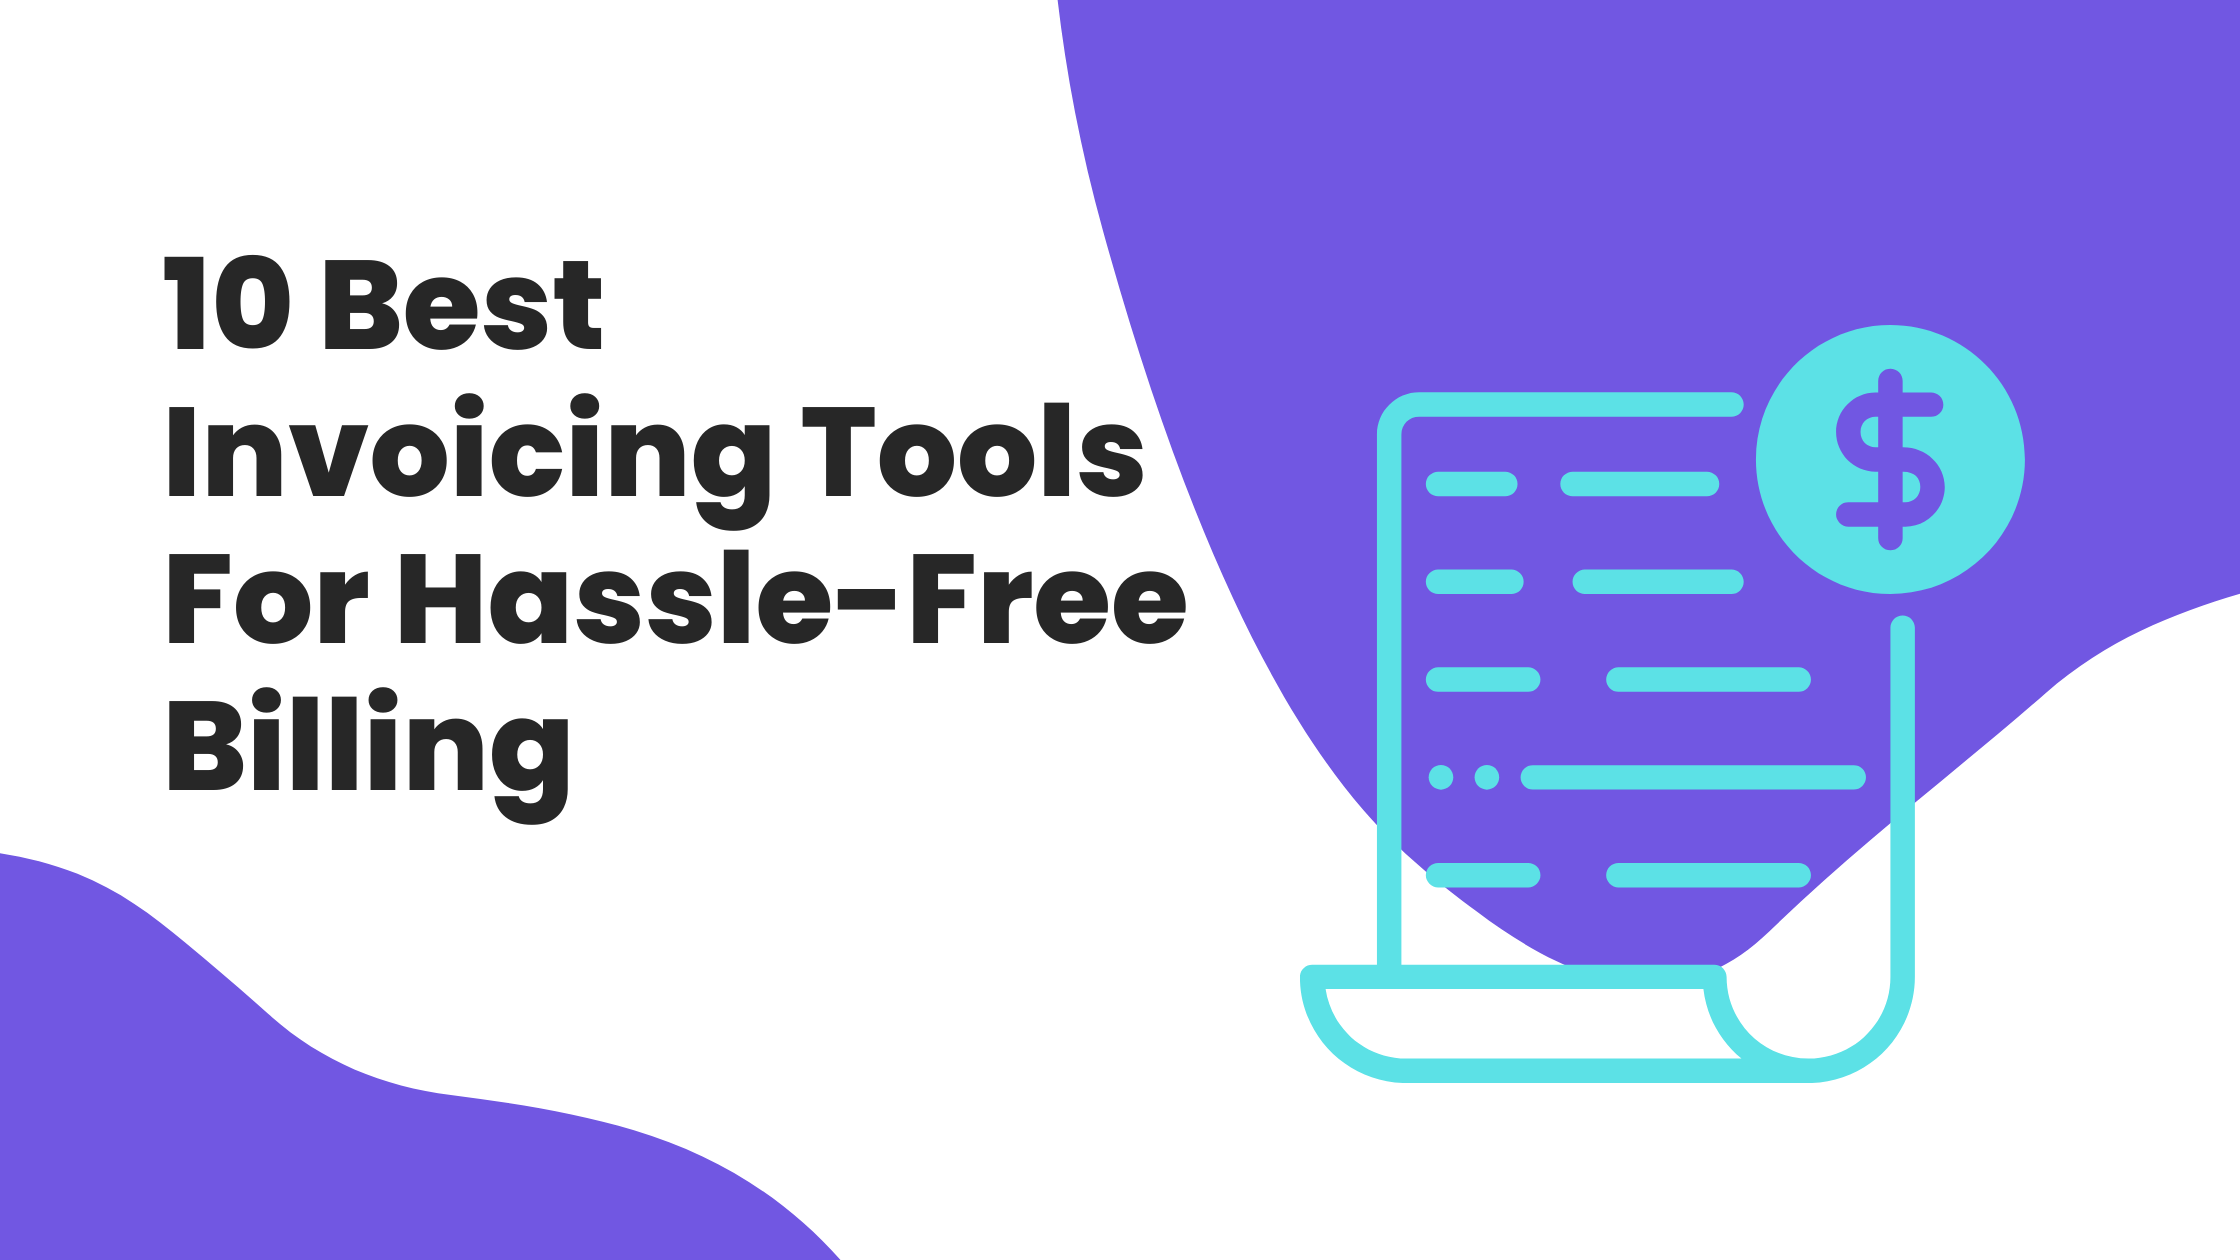 10 Best Invoicing Tools For Hassle-Free Billing